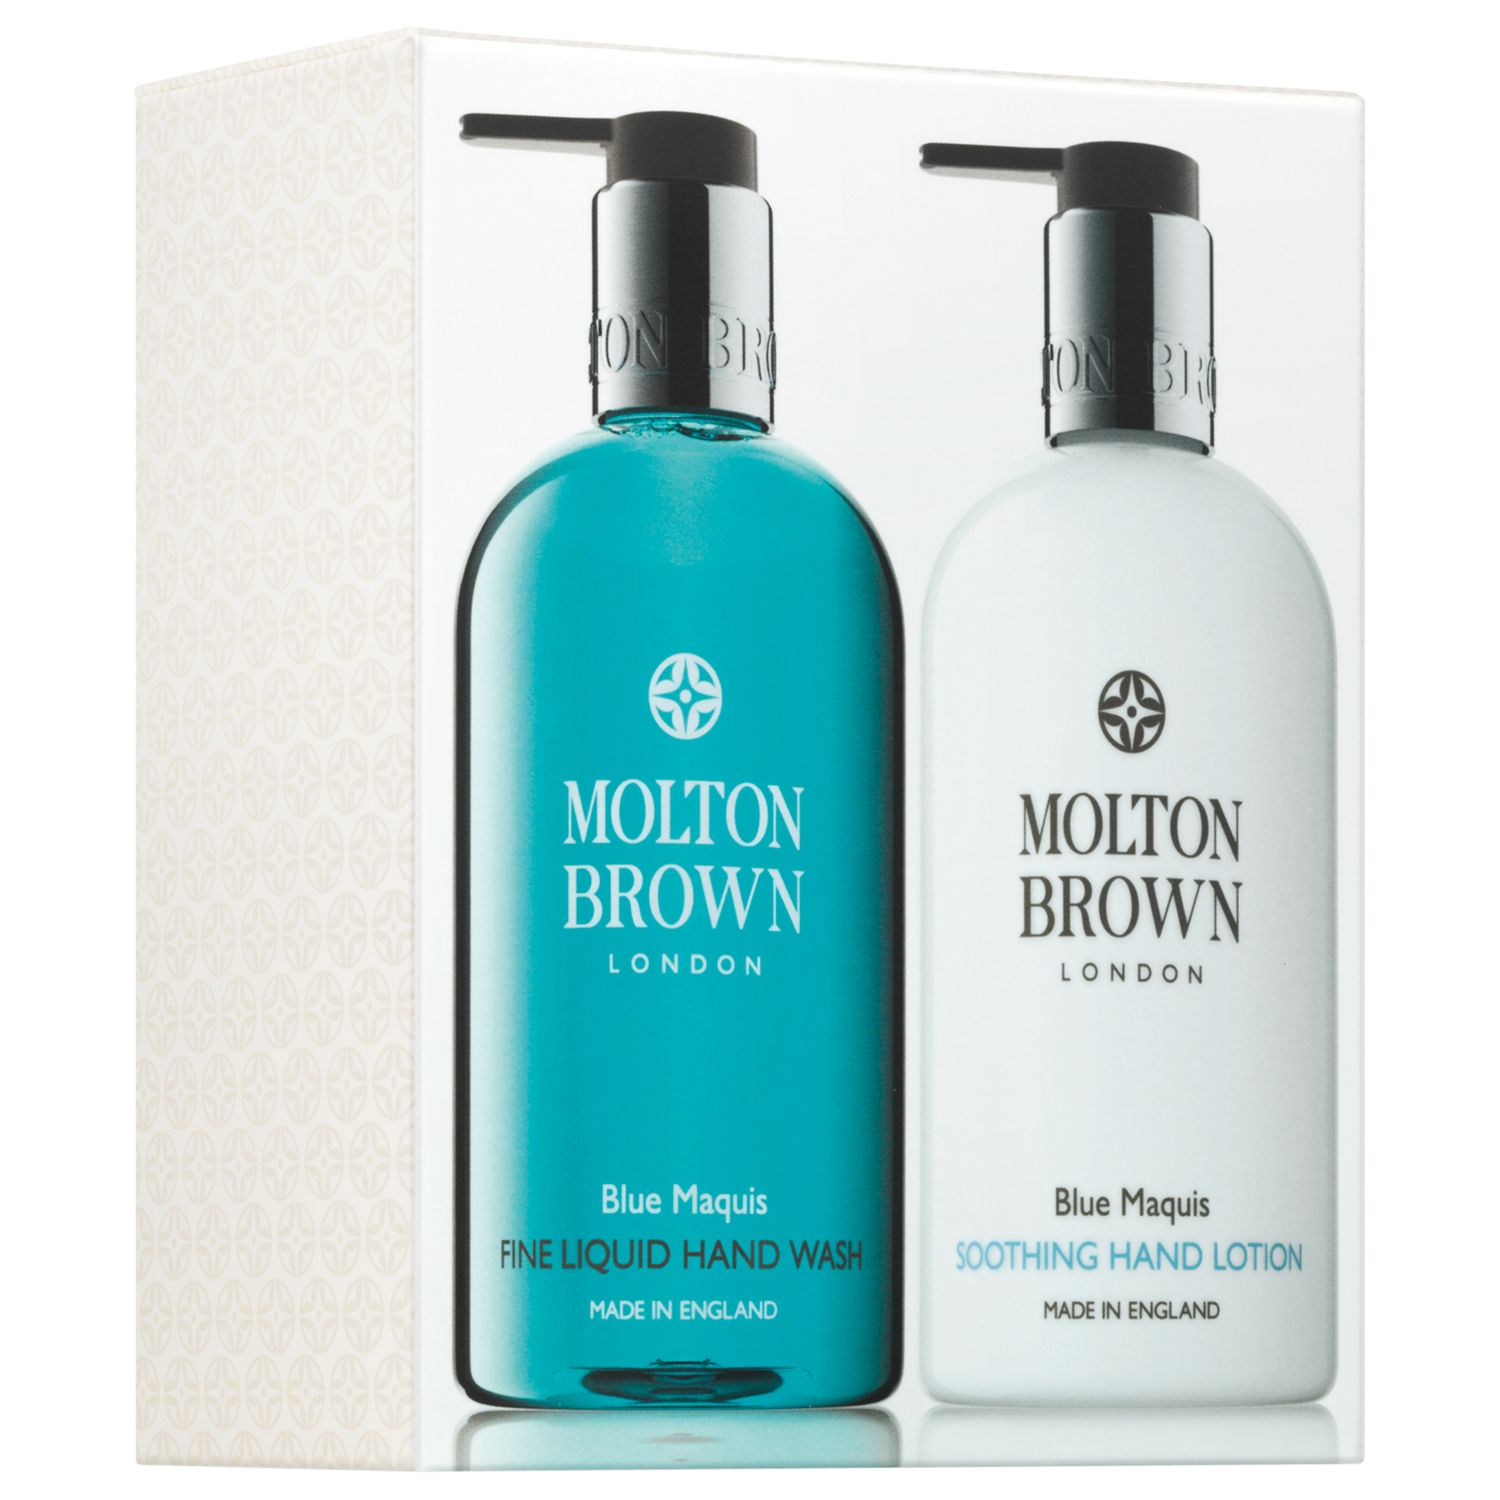 Molton Brown Blue Maquis Hand Care Set, 2 x 300ml at John Lewis & Partners